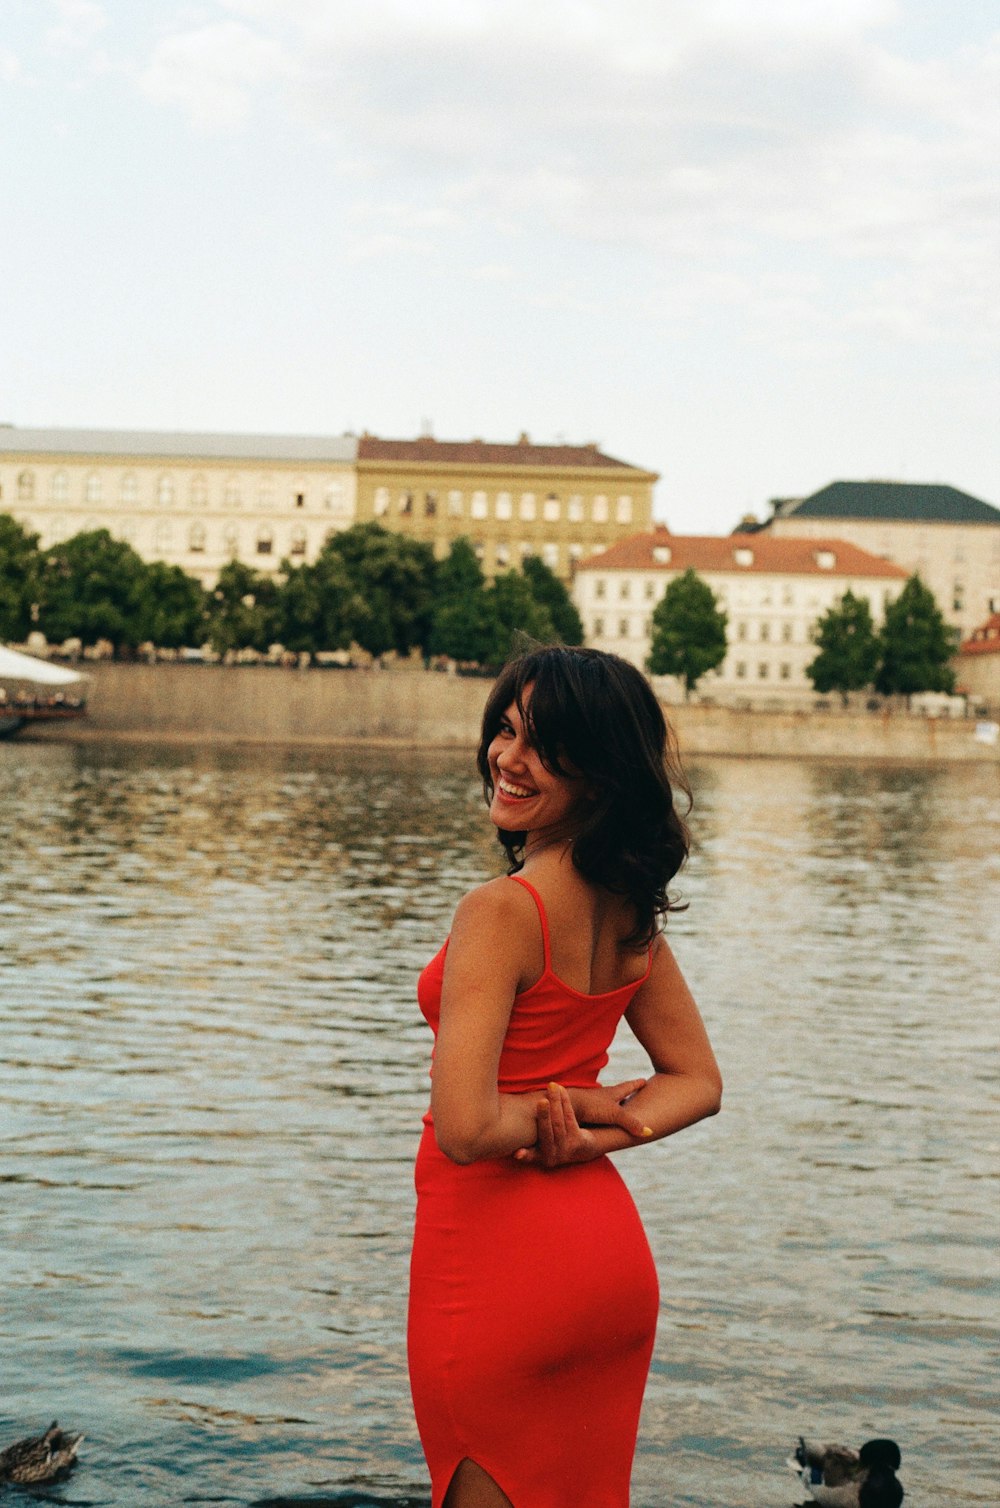 a woman in a red dress standing by a body of water